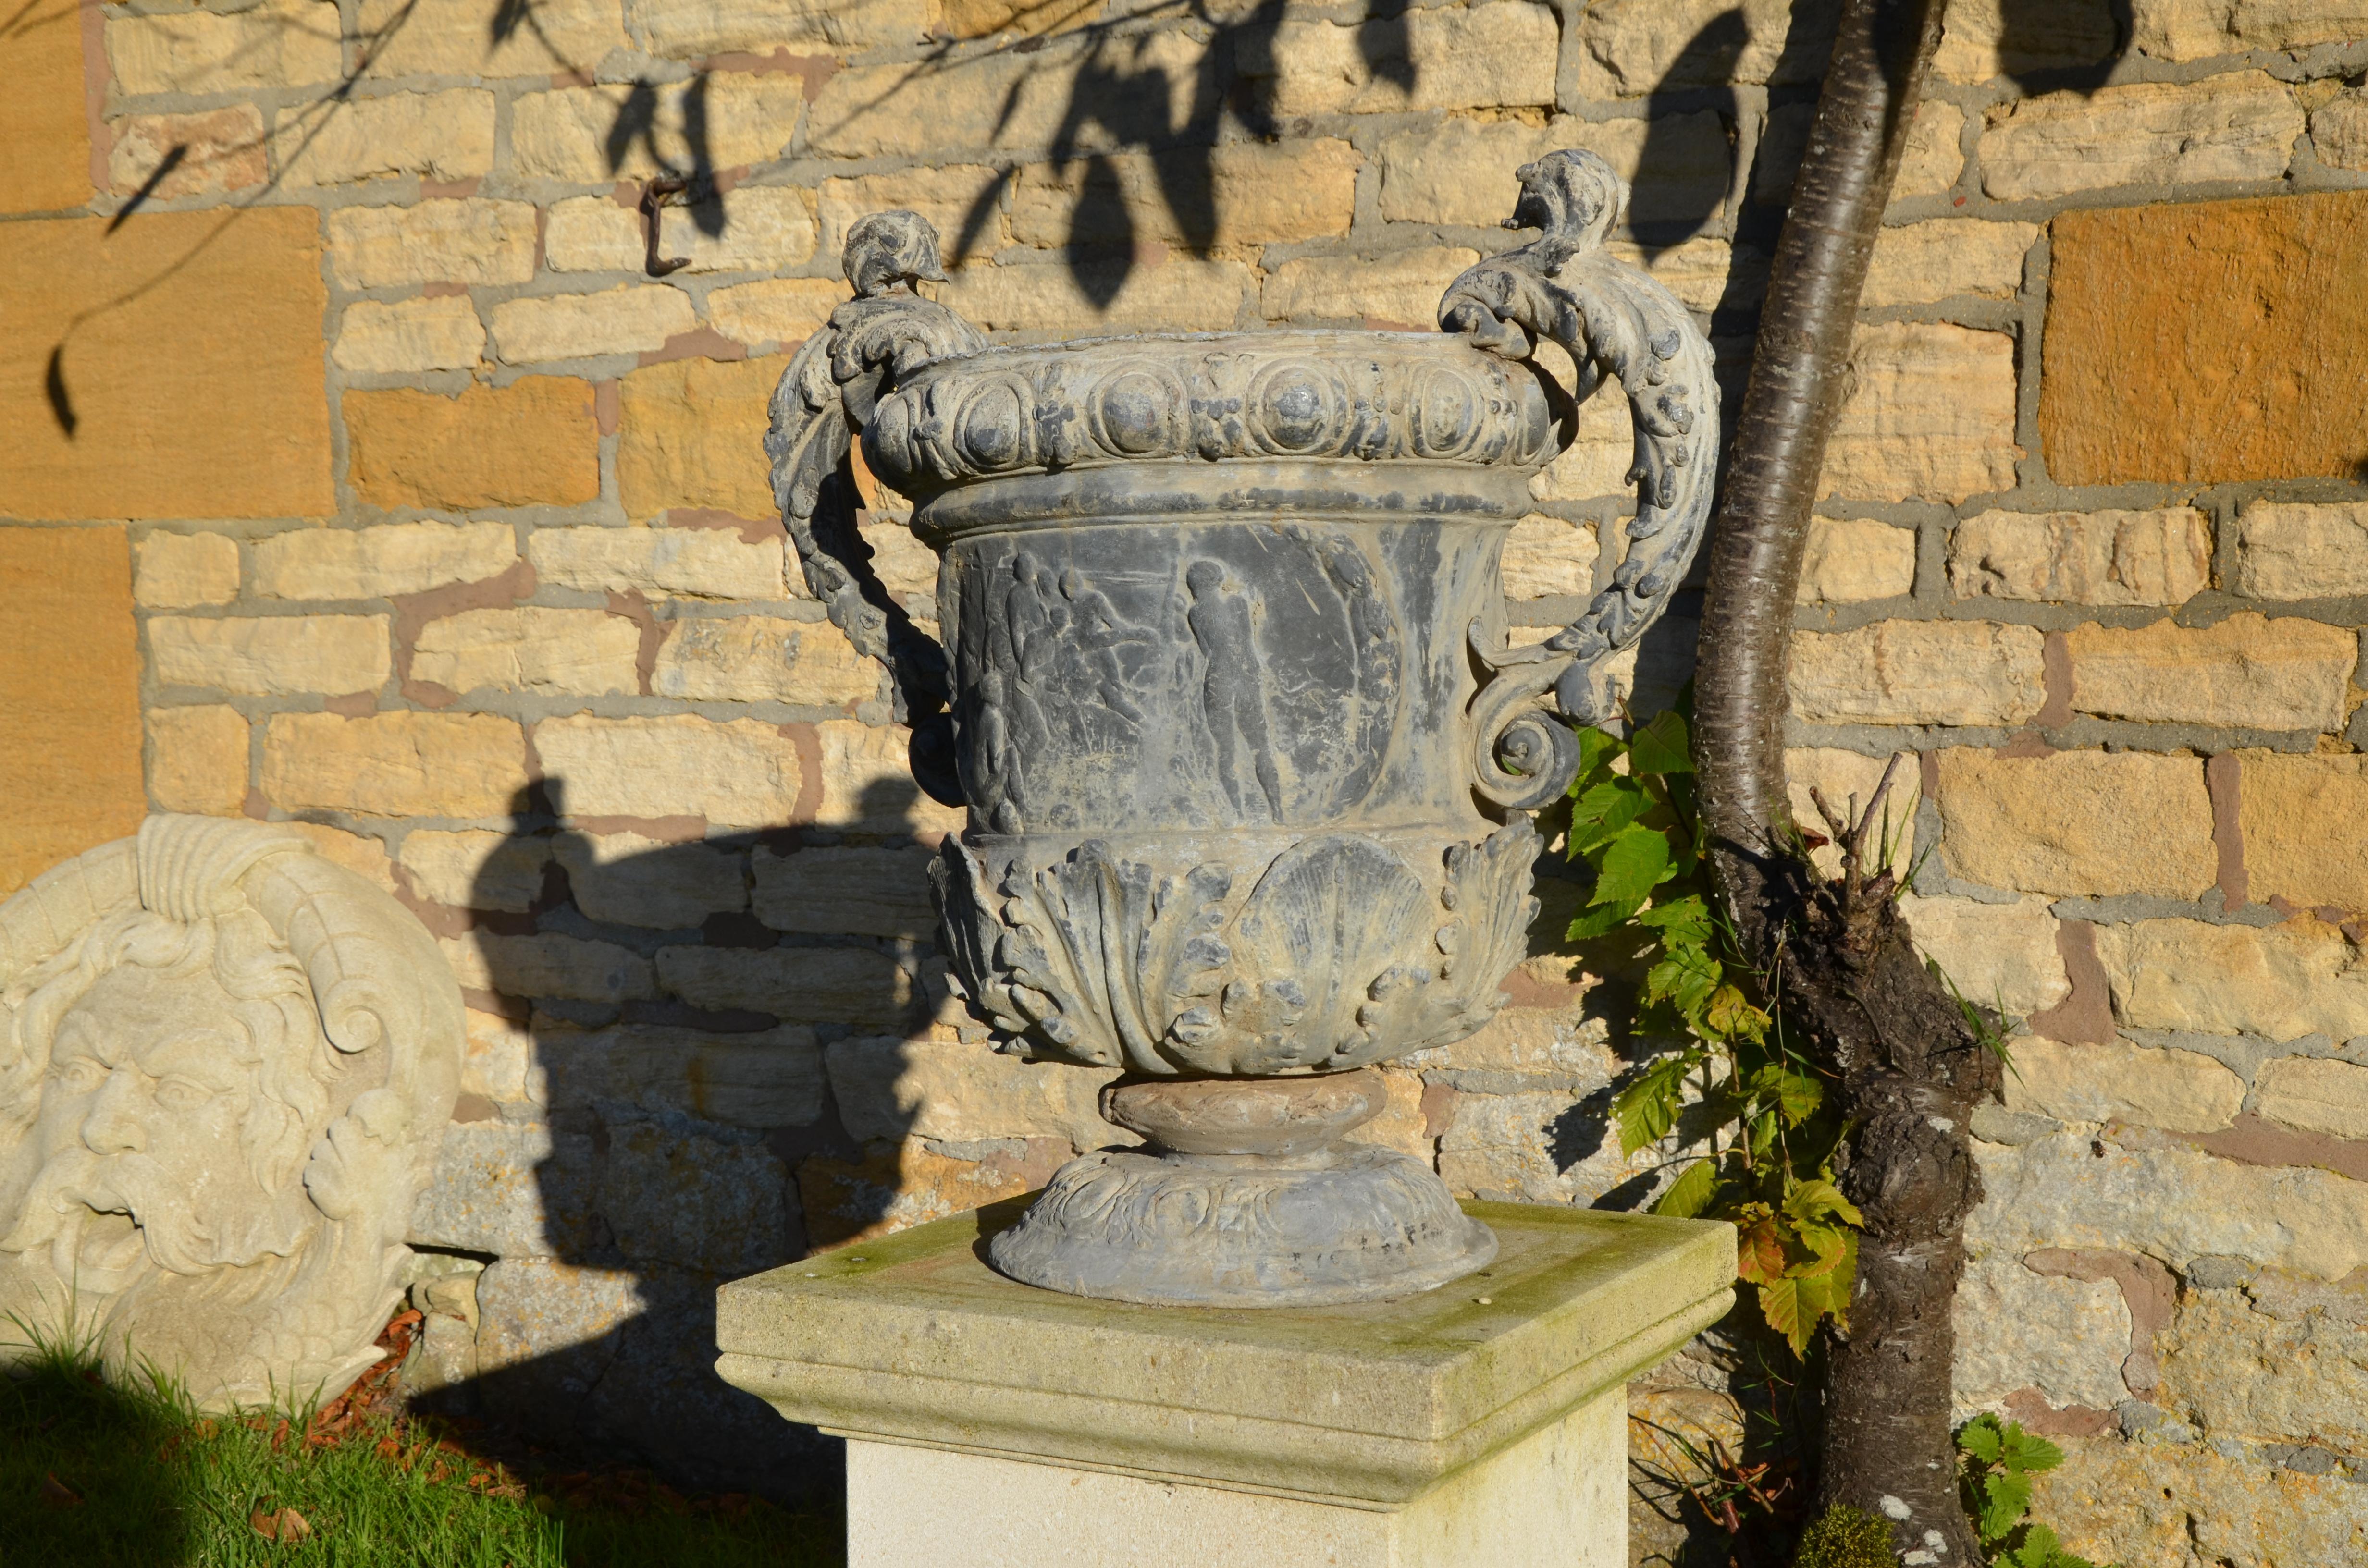 The main body decorated with allegorical scenes and acanthus leaf decoration, having foliate handles raised upon a decorative circular base.